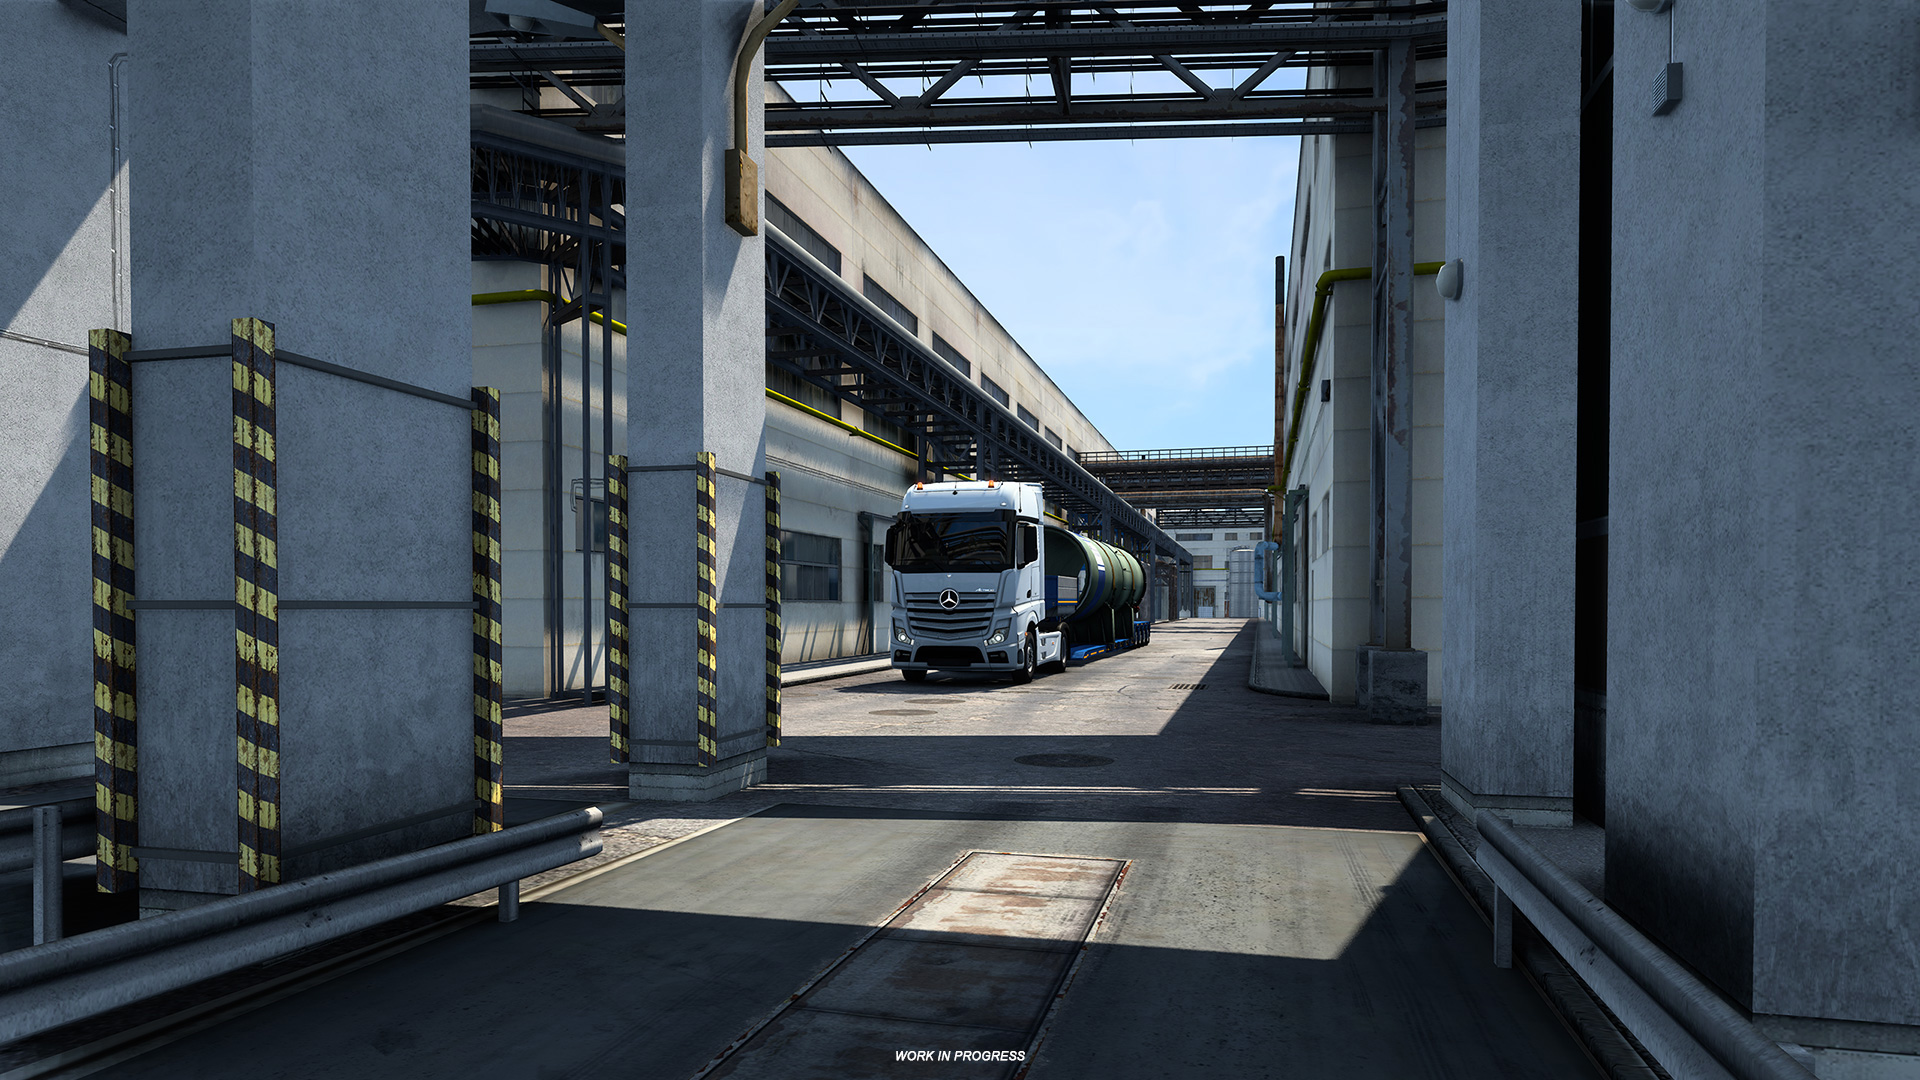 Euro Truck Simulator 2 devs remind us of “the main reason for a trucker’s journey”